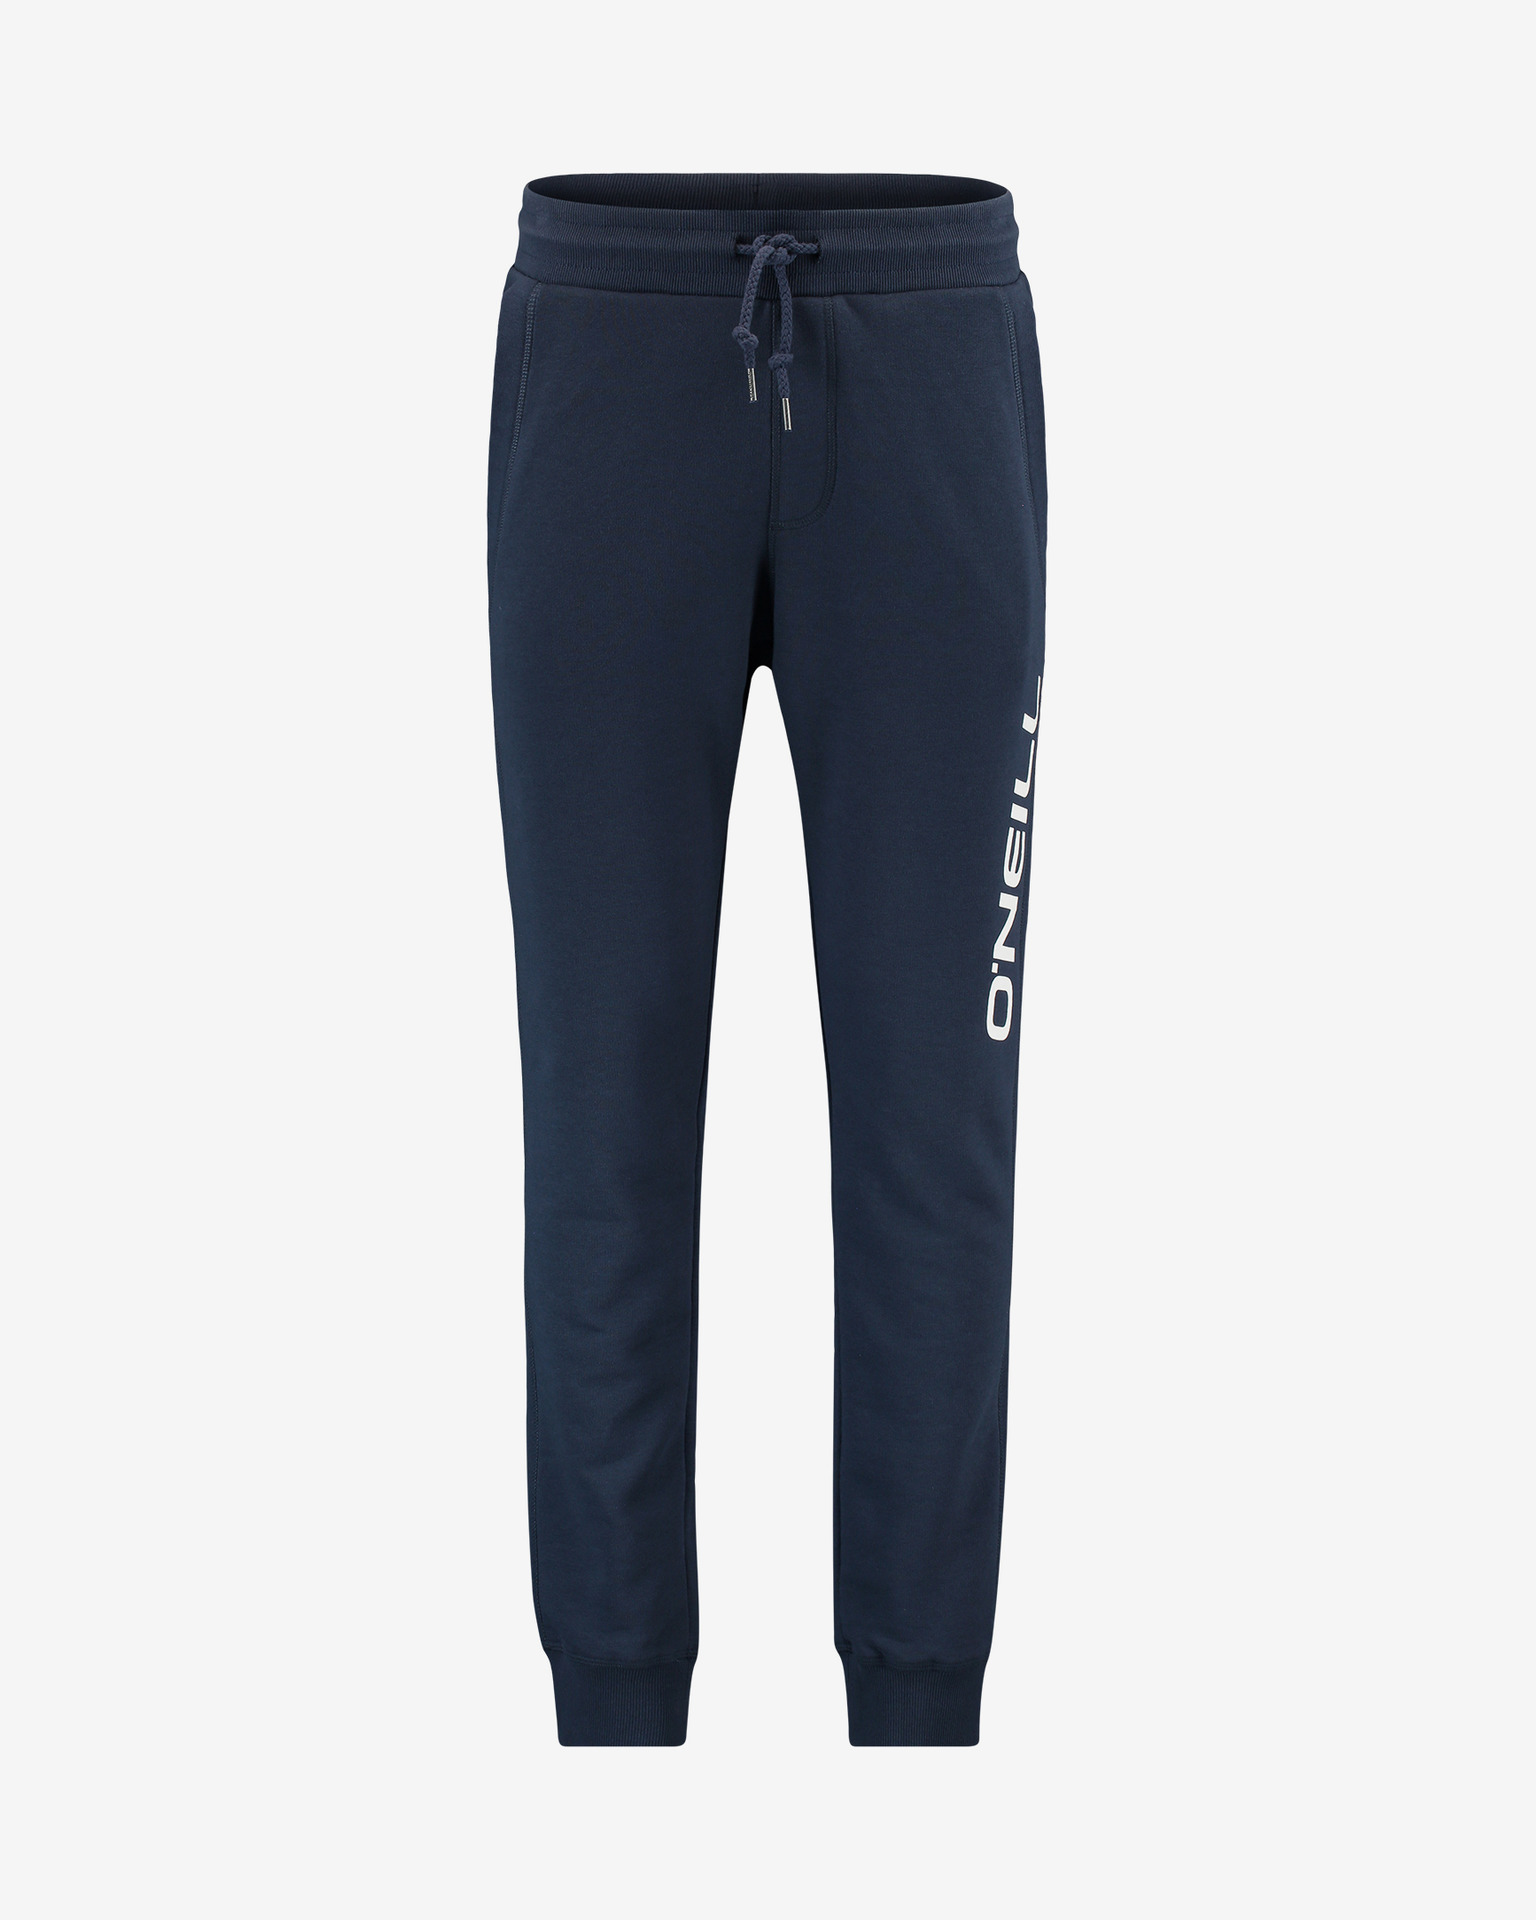 O'Neill Surf State Jogger Pants - Surf State sweatpants